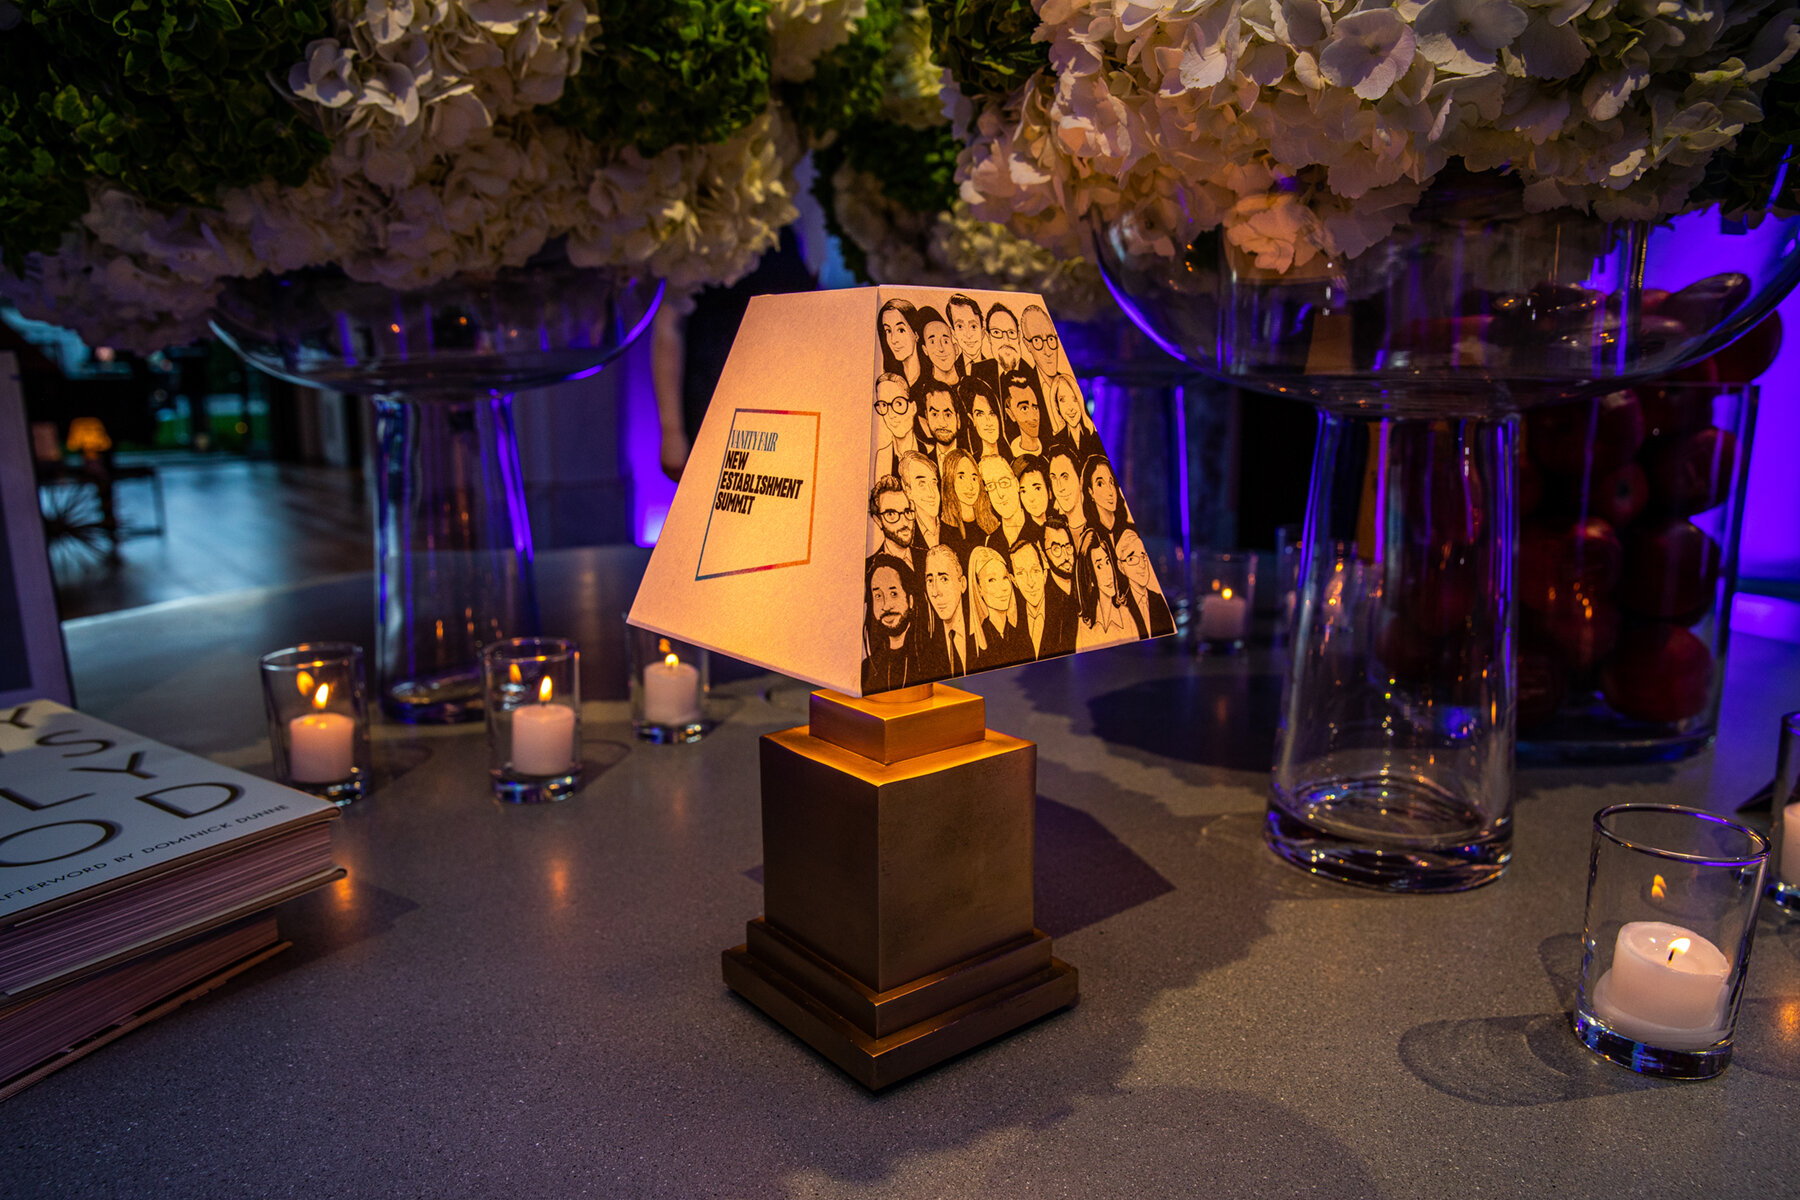 Table decor at the launch cocktail party - 2019